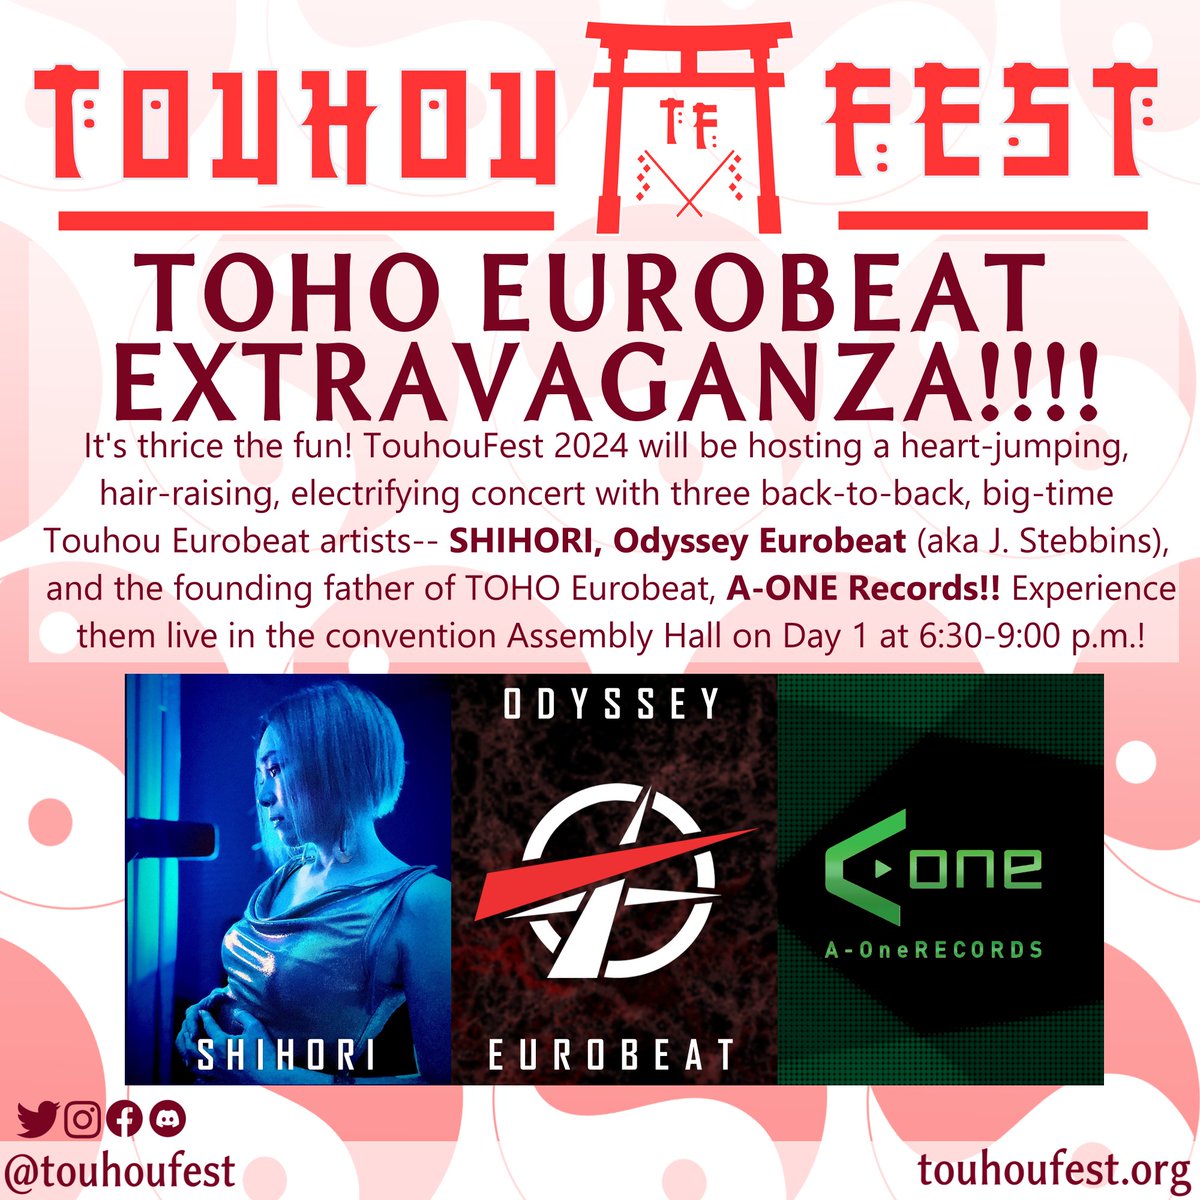 What's better than Eurobeat? MORE Eurobeat! Get ready for a special 3 hour concert featuring Shihori, Odyssey and A-One Records Saturday, April 27th, evening at TouhouFest 2024 from 6:30-9:30pm! A-One: @A_One_JP Odyssey: @OdysseyEB Shihori: @shihoriNY #touhoufest…